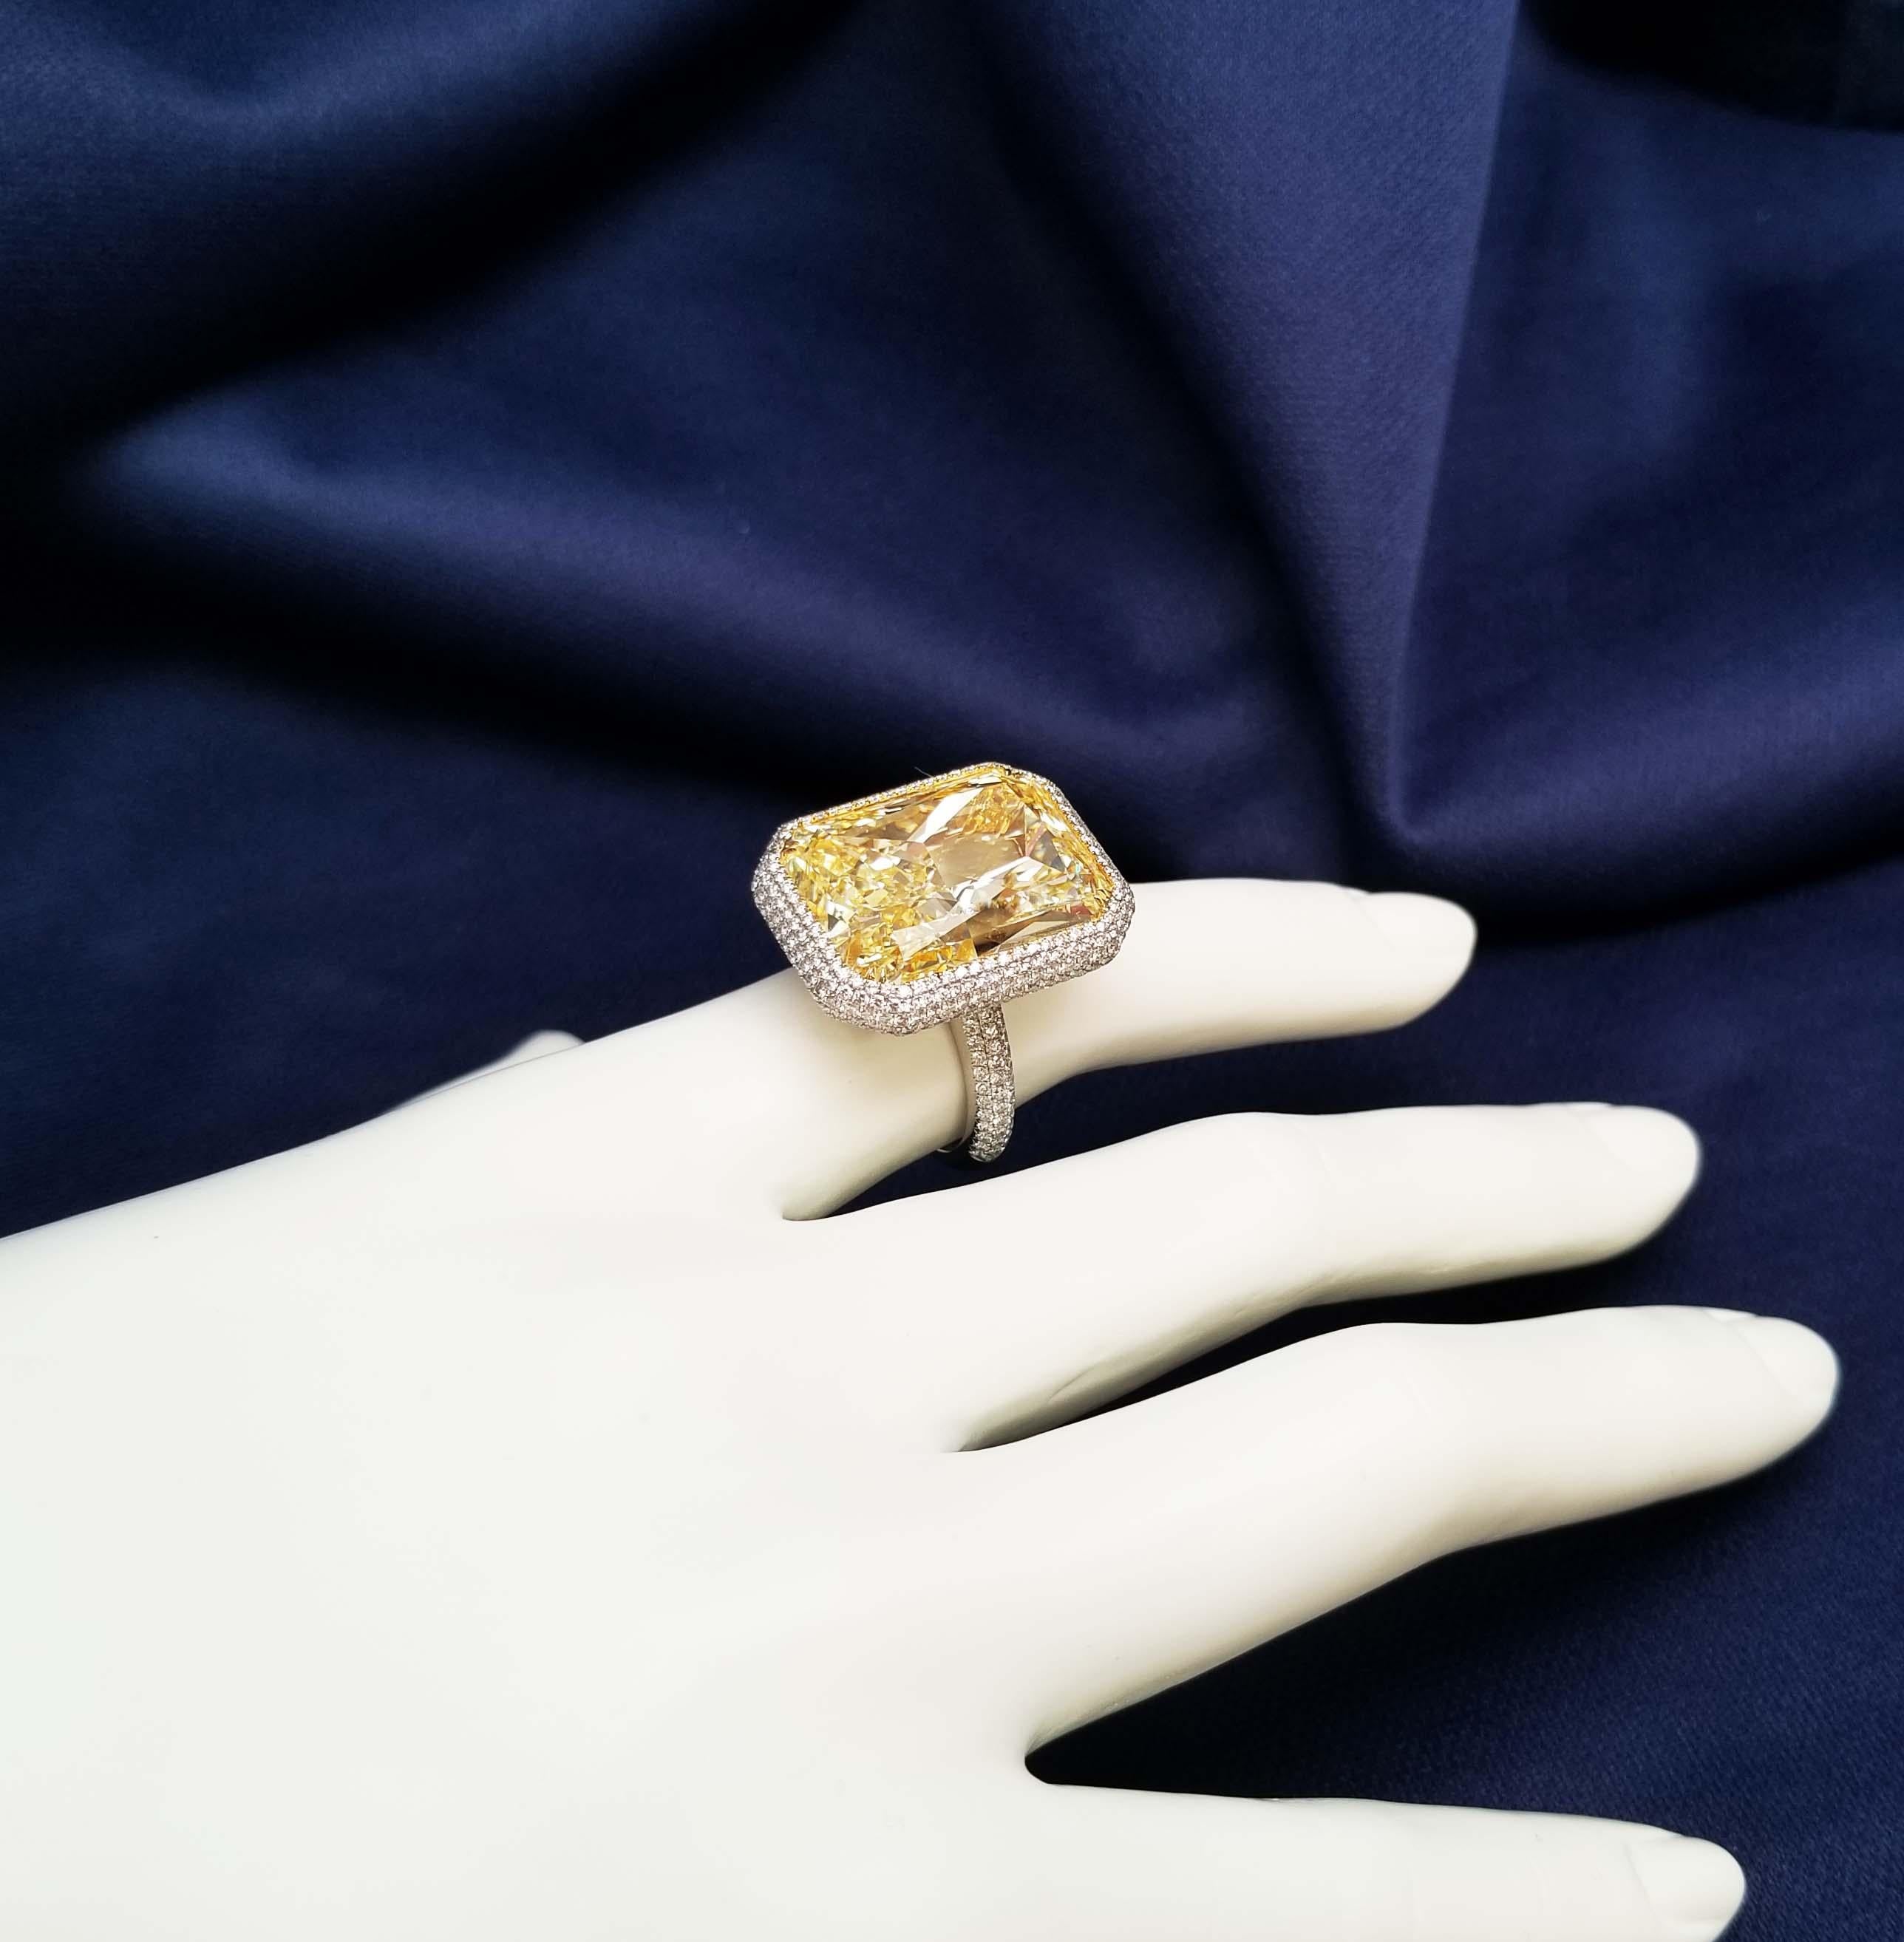 Scarselli 31 Carat Natural Fancy Yellow Diamond Ring VS1 Clarity in Platinum GIA For Sale 2